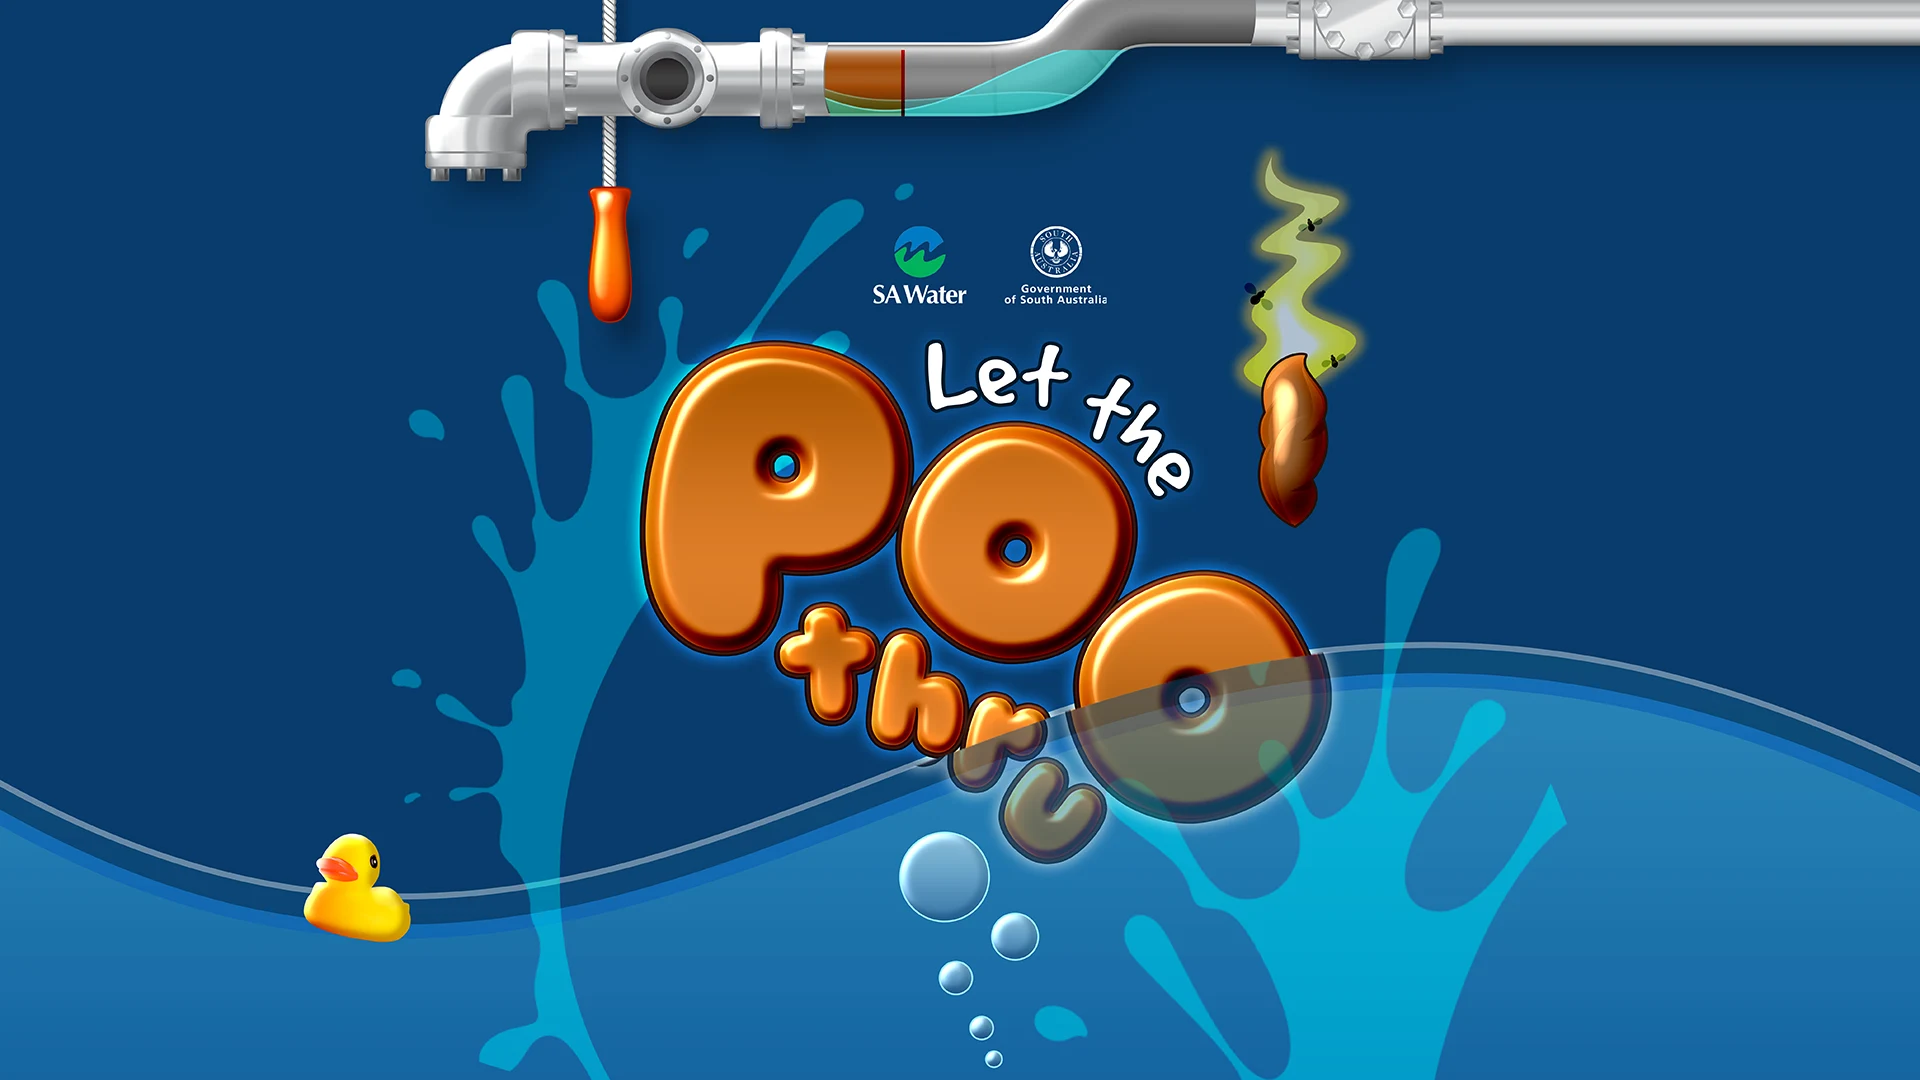 Let the Poo Thru by SA Water brand and logo